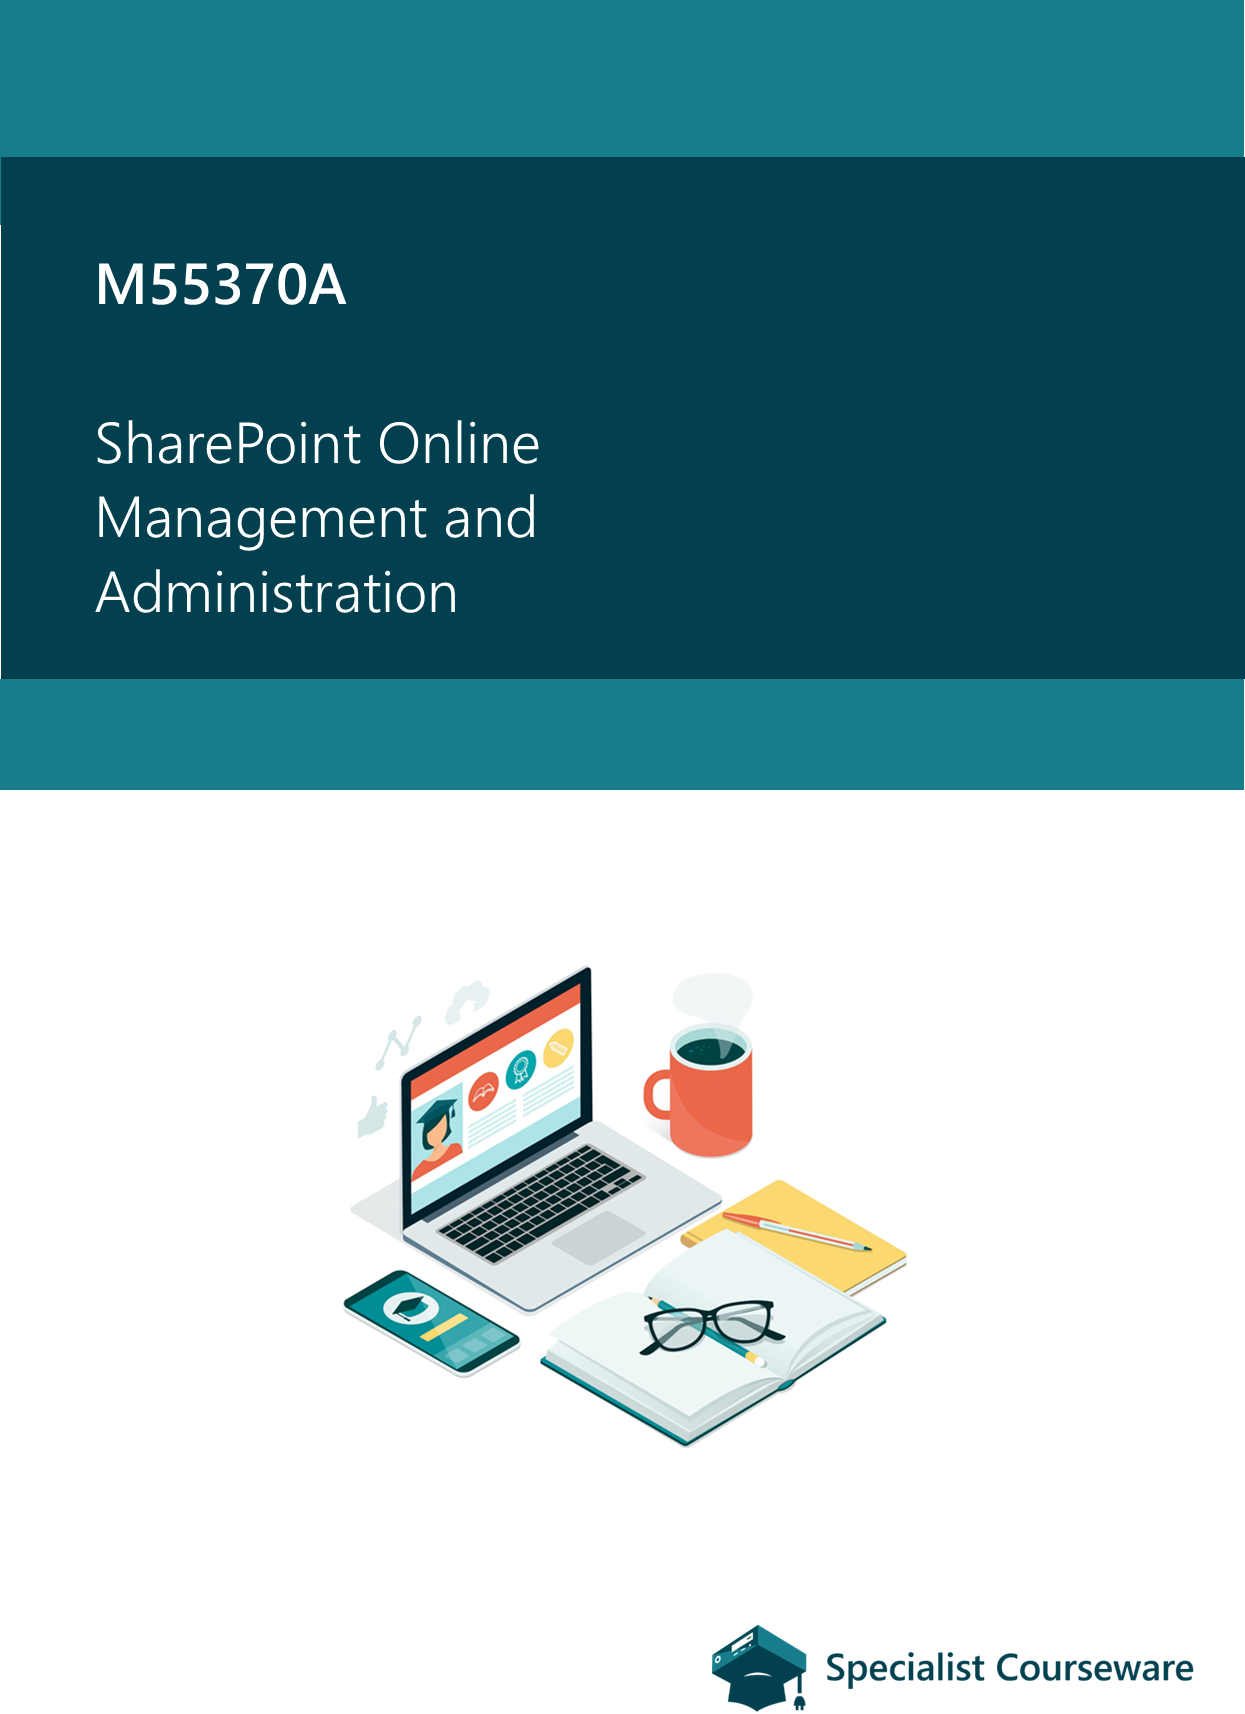 M55370A SharePoint Online Management and Administration